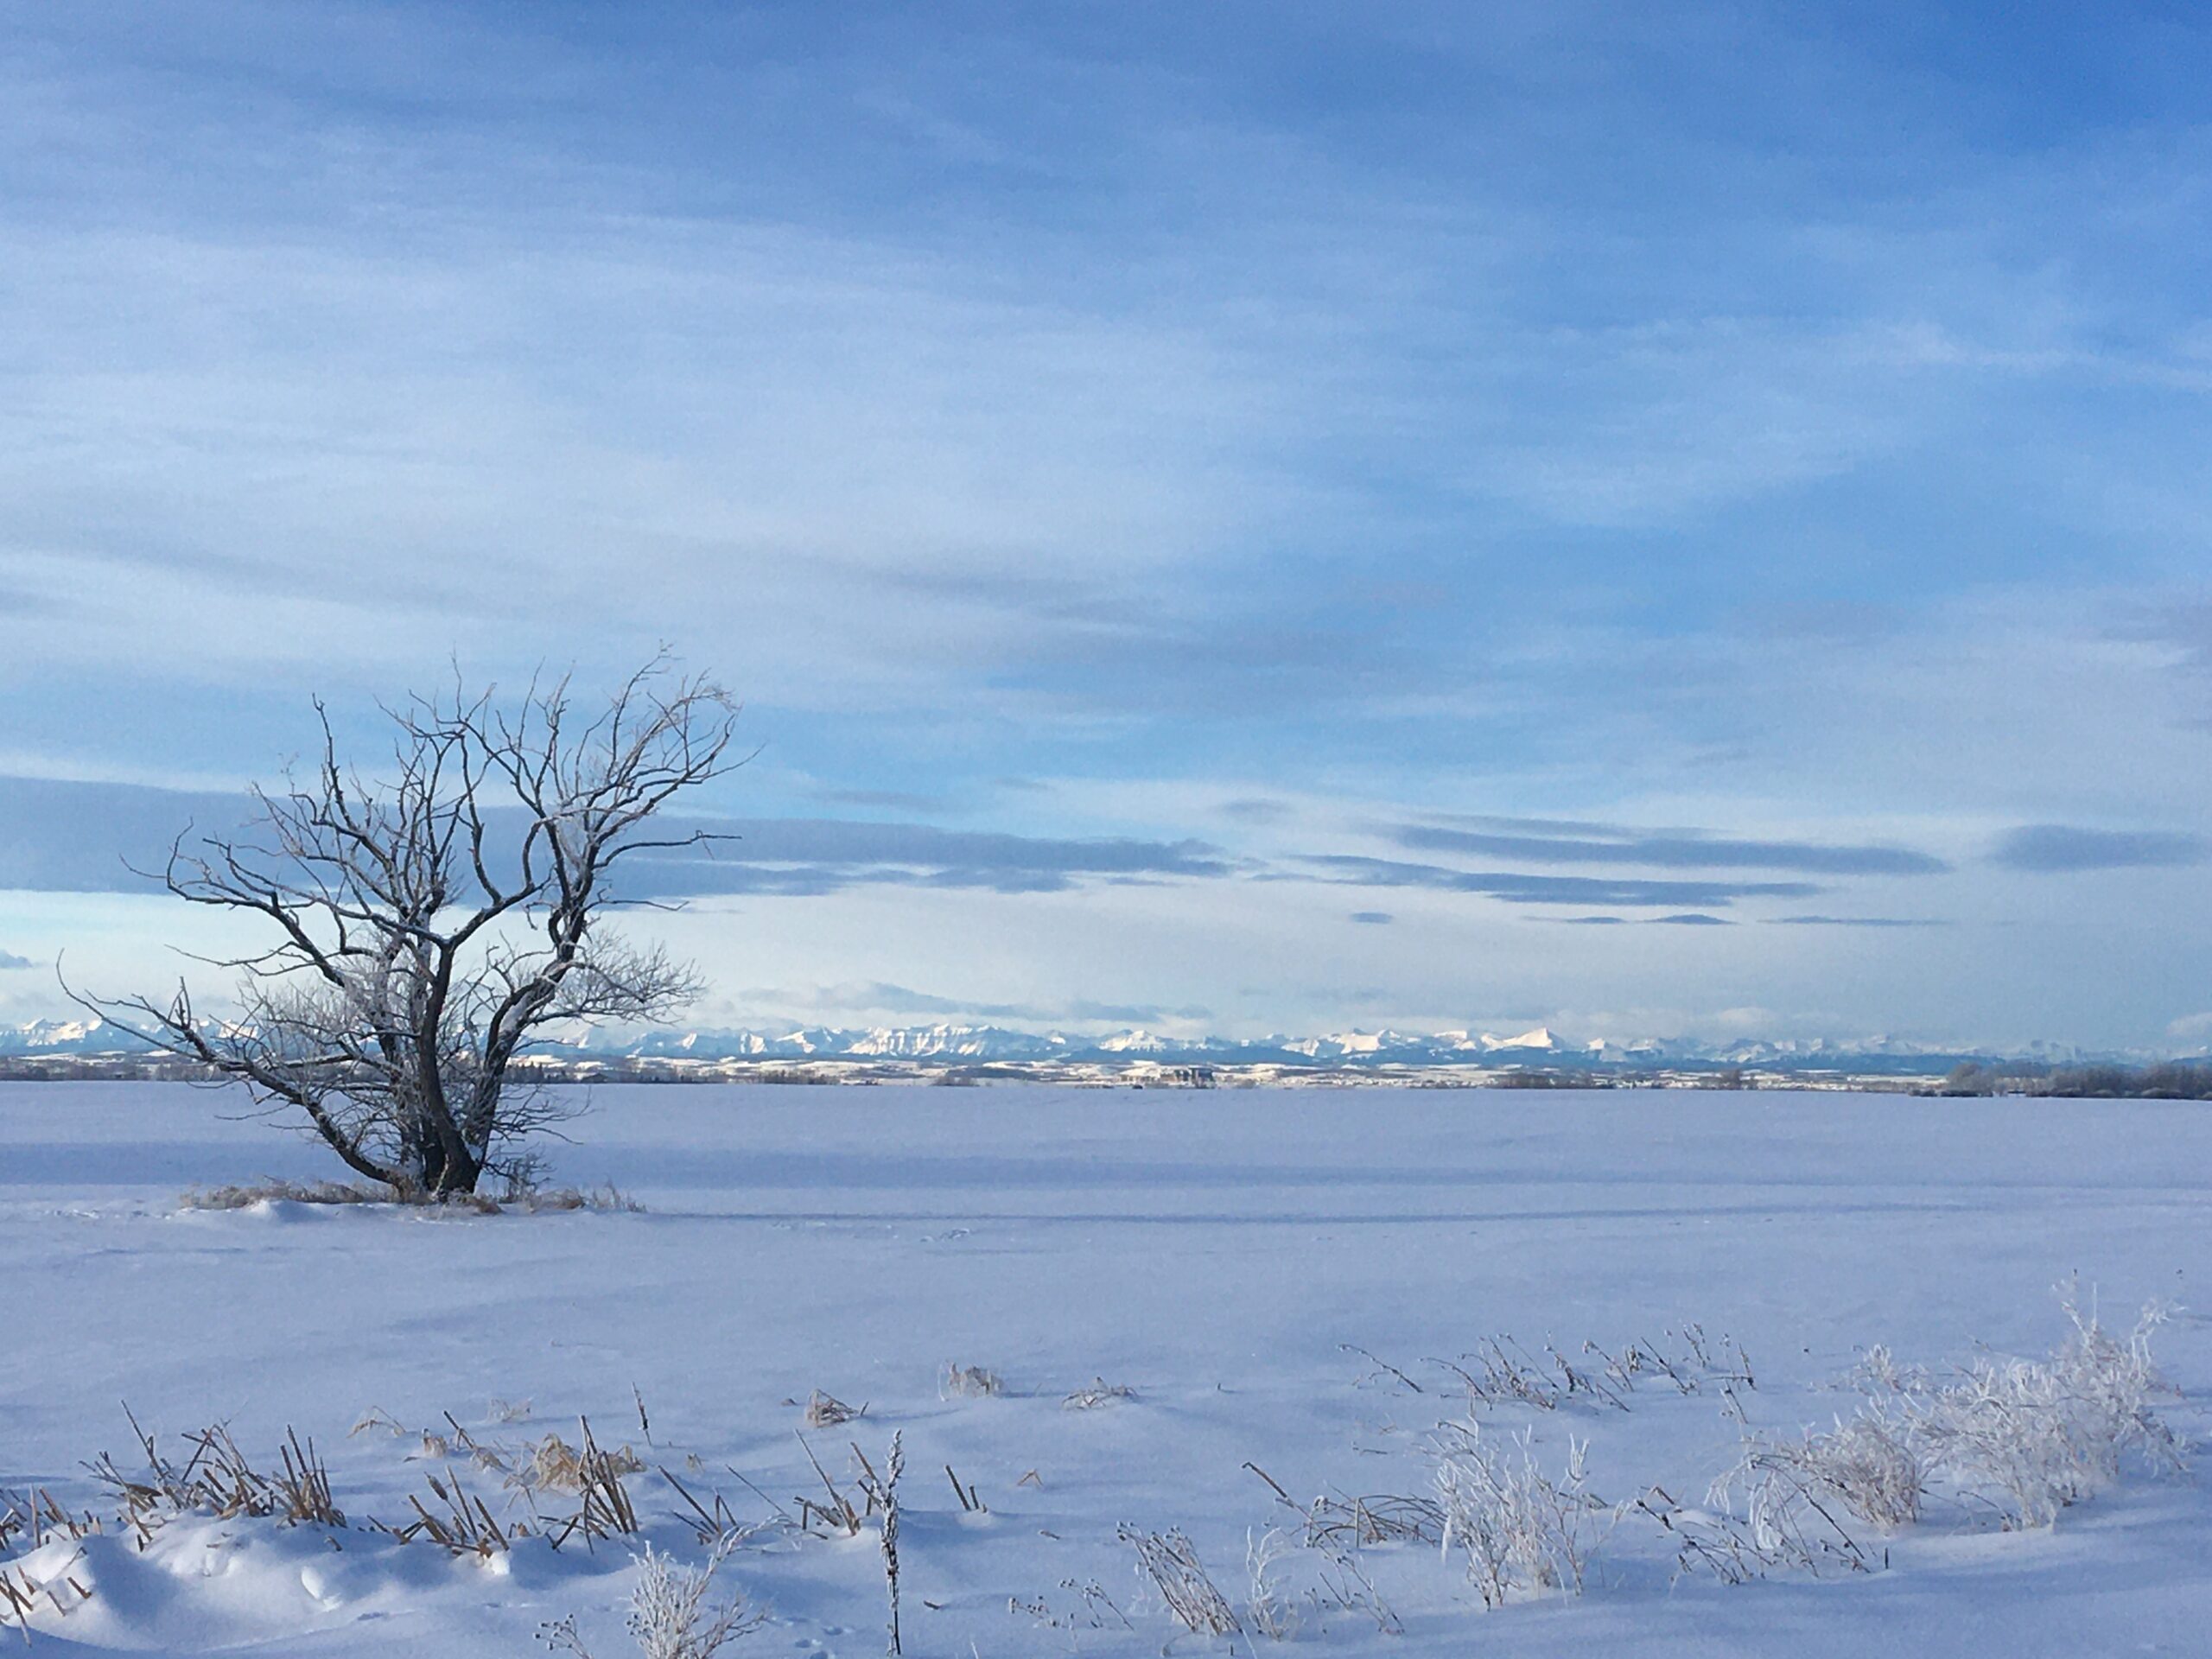 View of a prairie landscape in winte with snow covered the ground. A bare bush with no leaves is seen on the left and there is a blue sky with clouds.